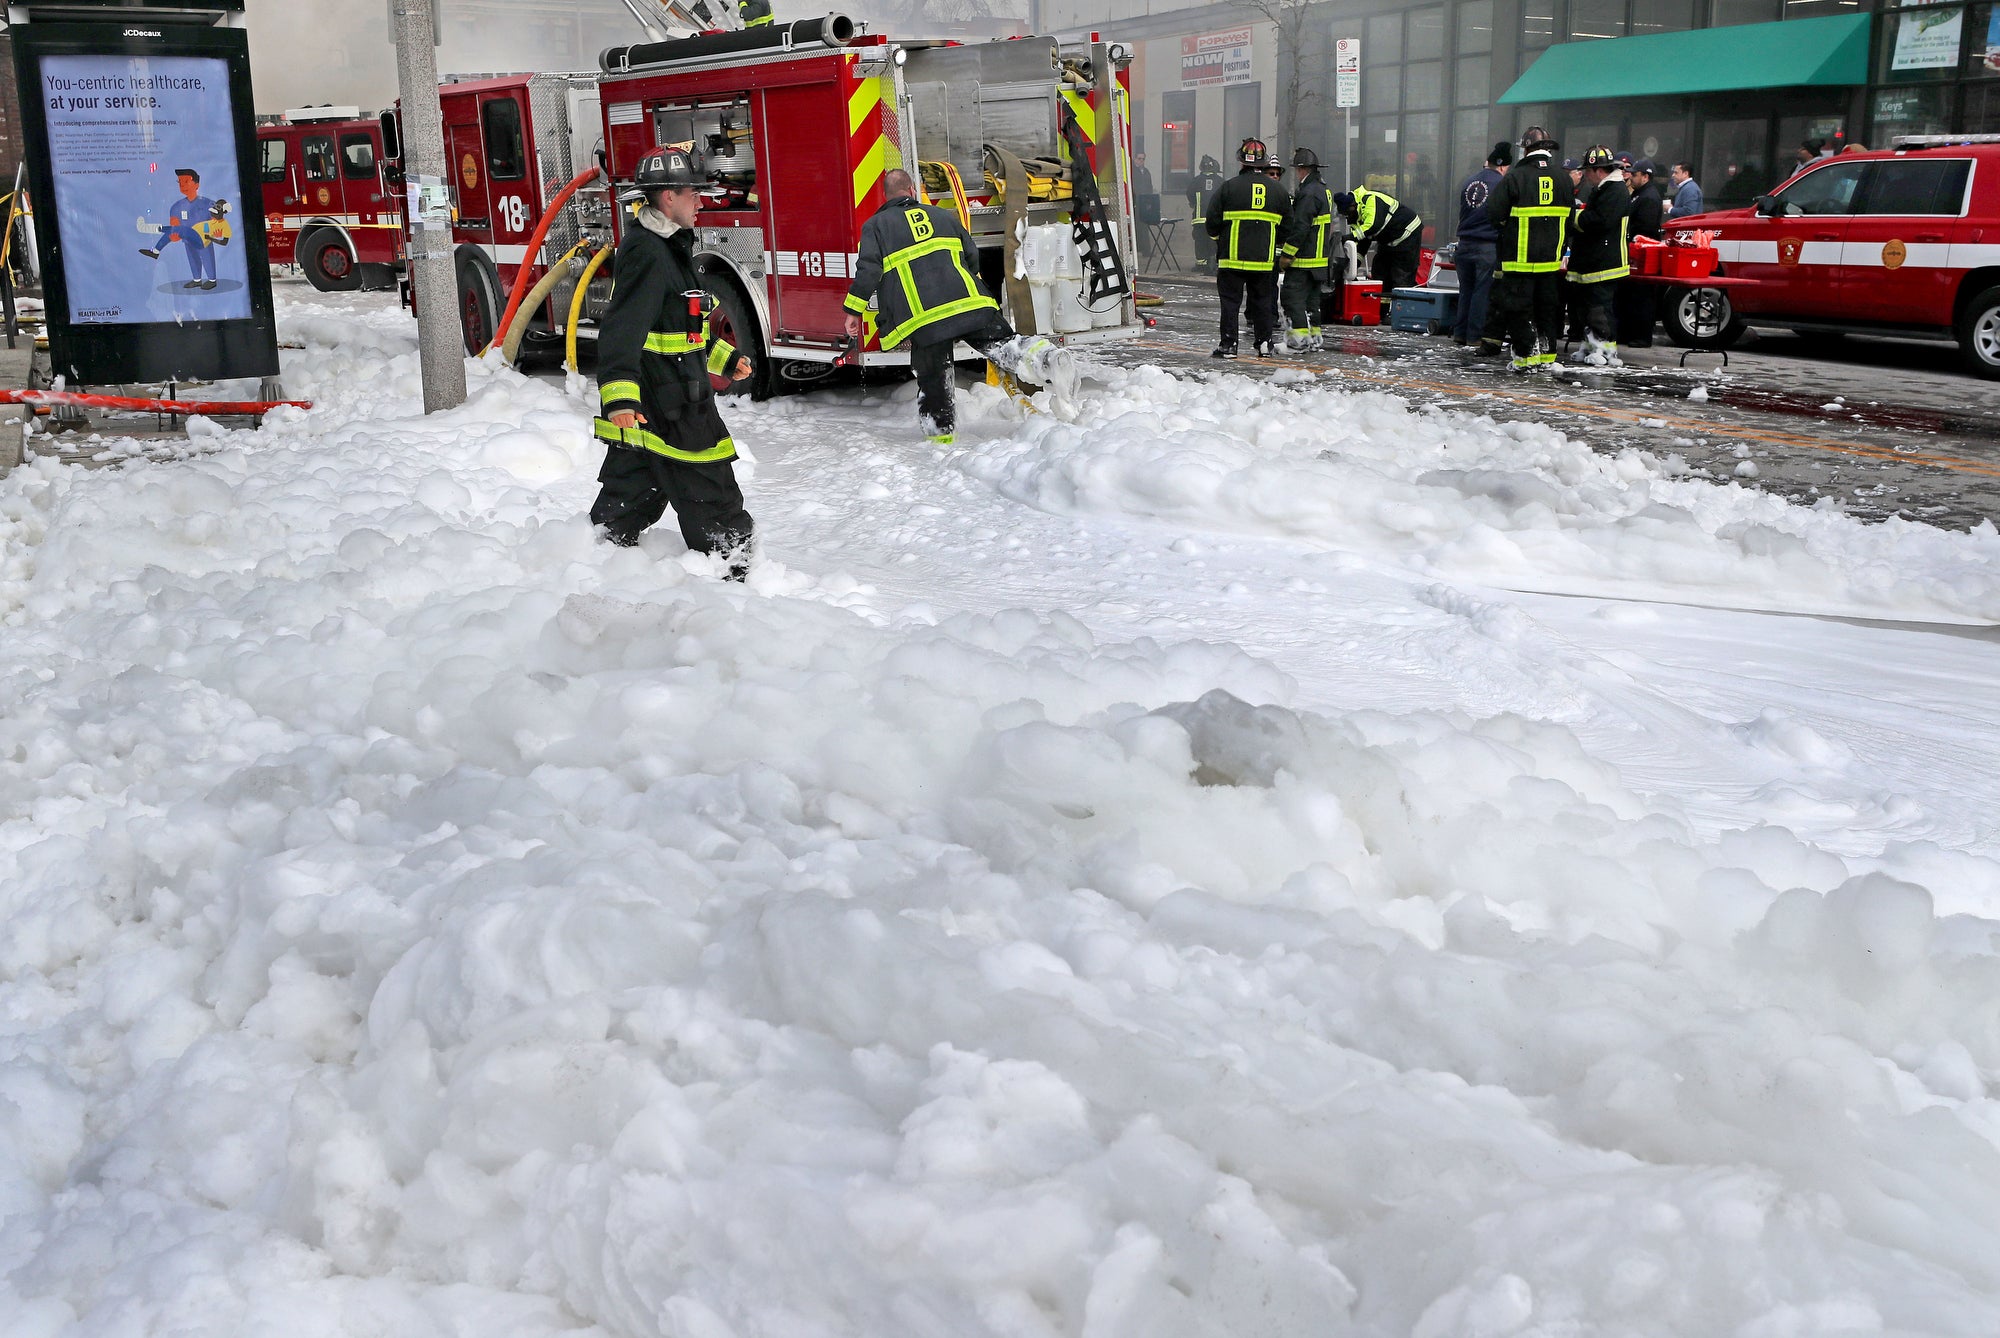 Firefighters wade through a thick layer of foam while cleaning up after a fire on a city street